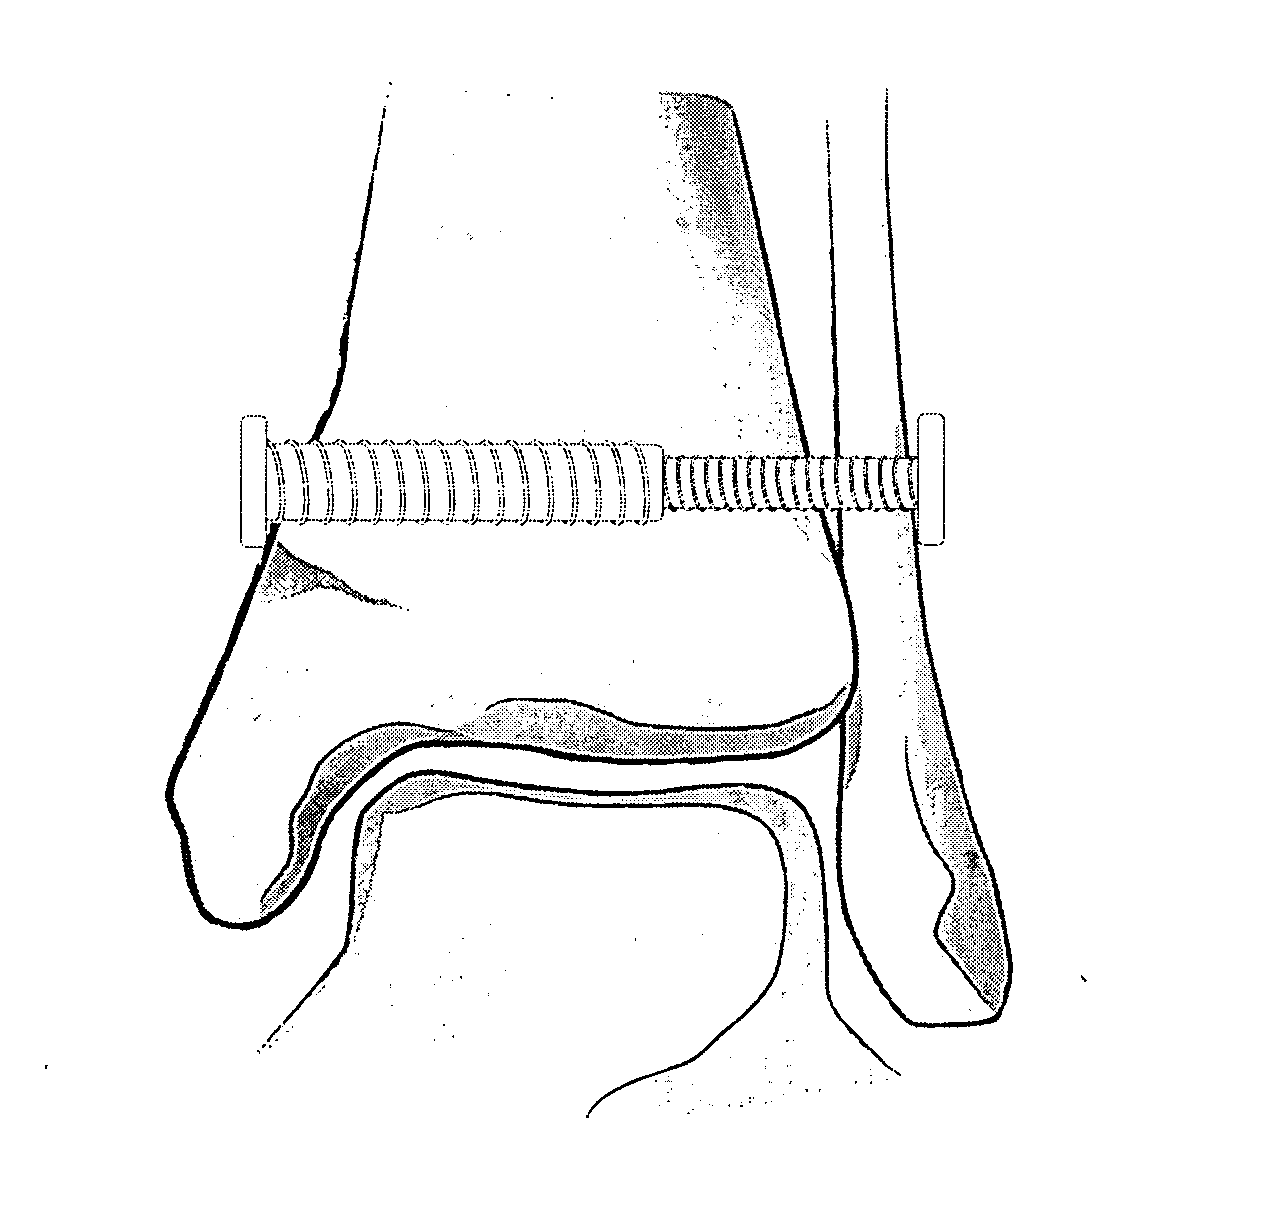 Connecting Cannulated Bone Screws